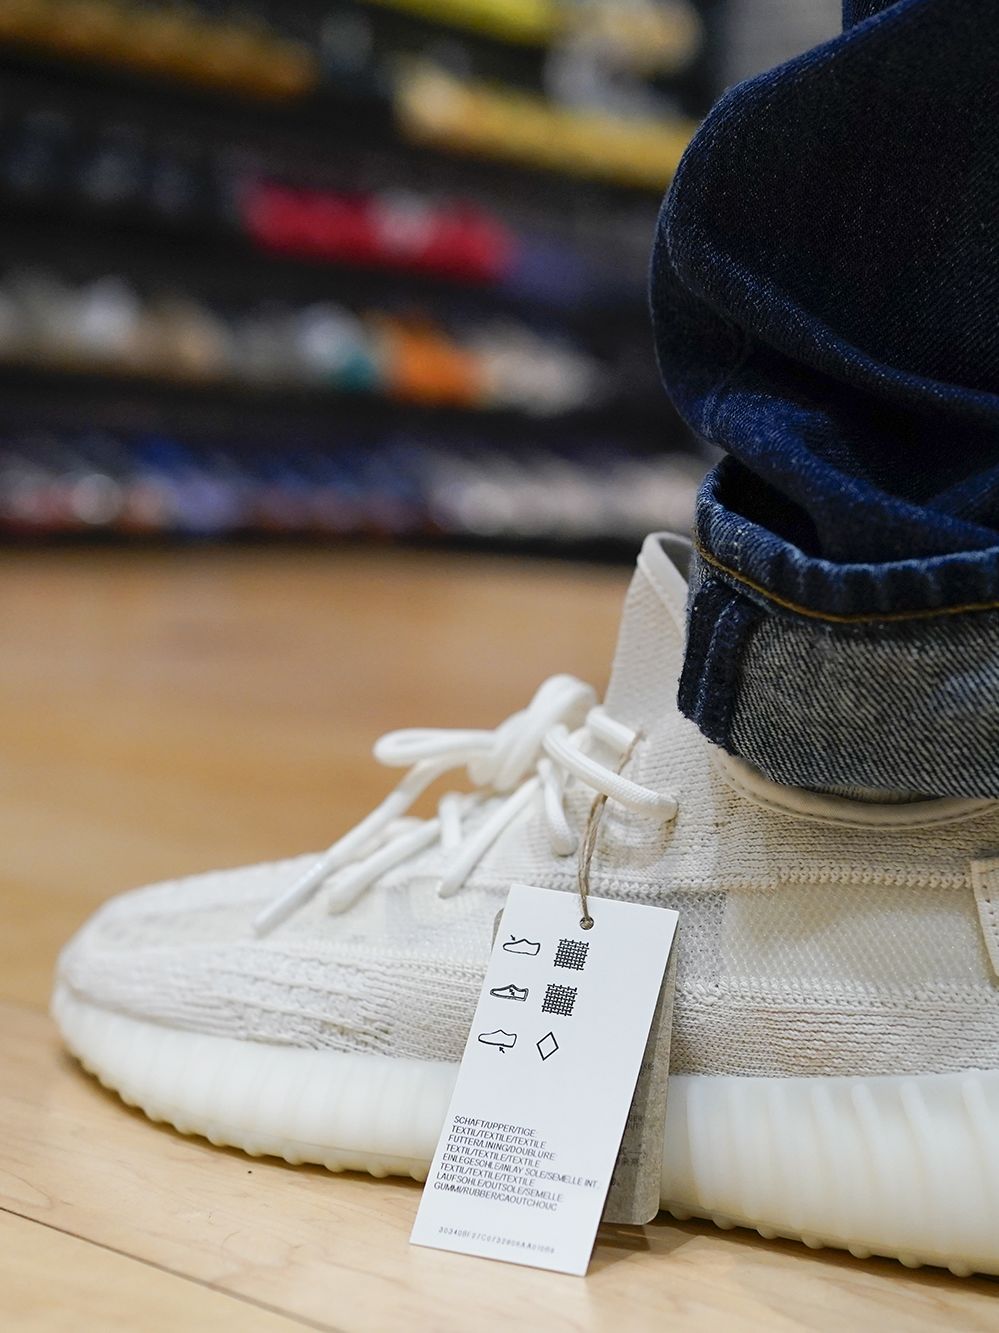 Agrícola Final Doblez Adidas will continue to sell Kanye West's shoe designs without the Yeezy  name | CNN Business